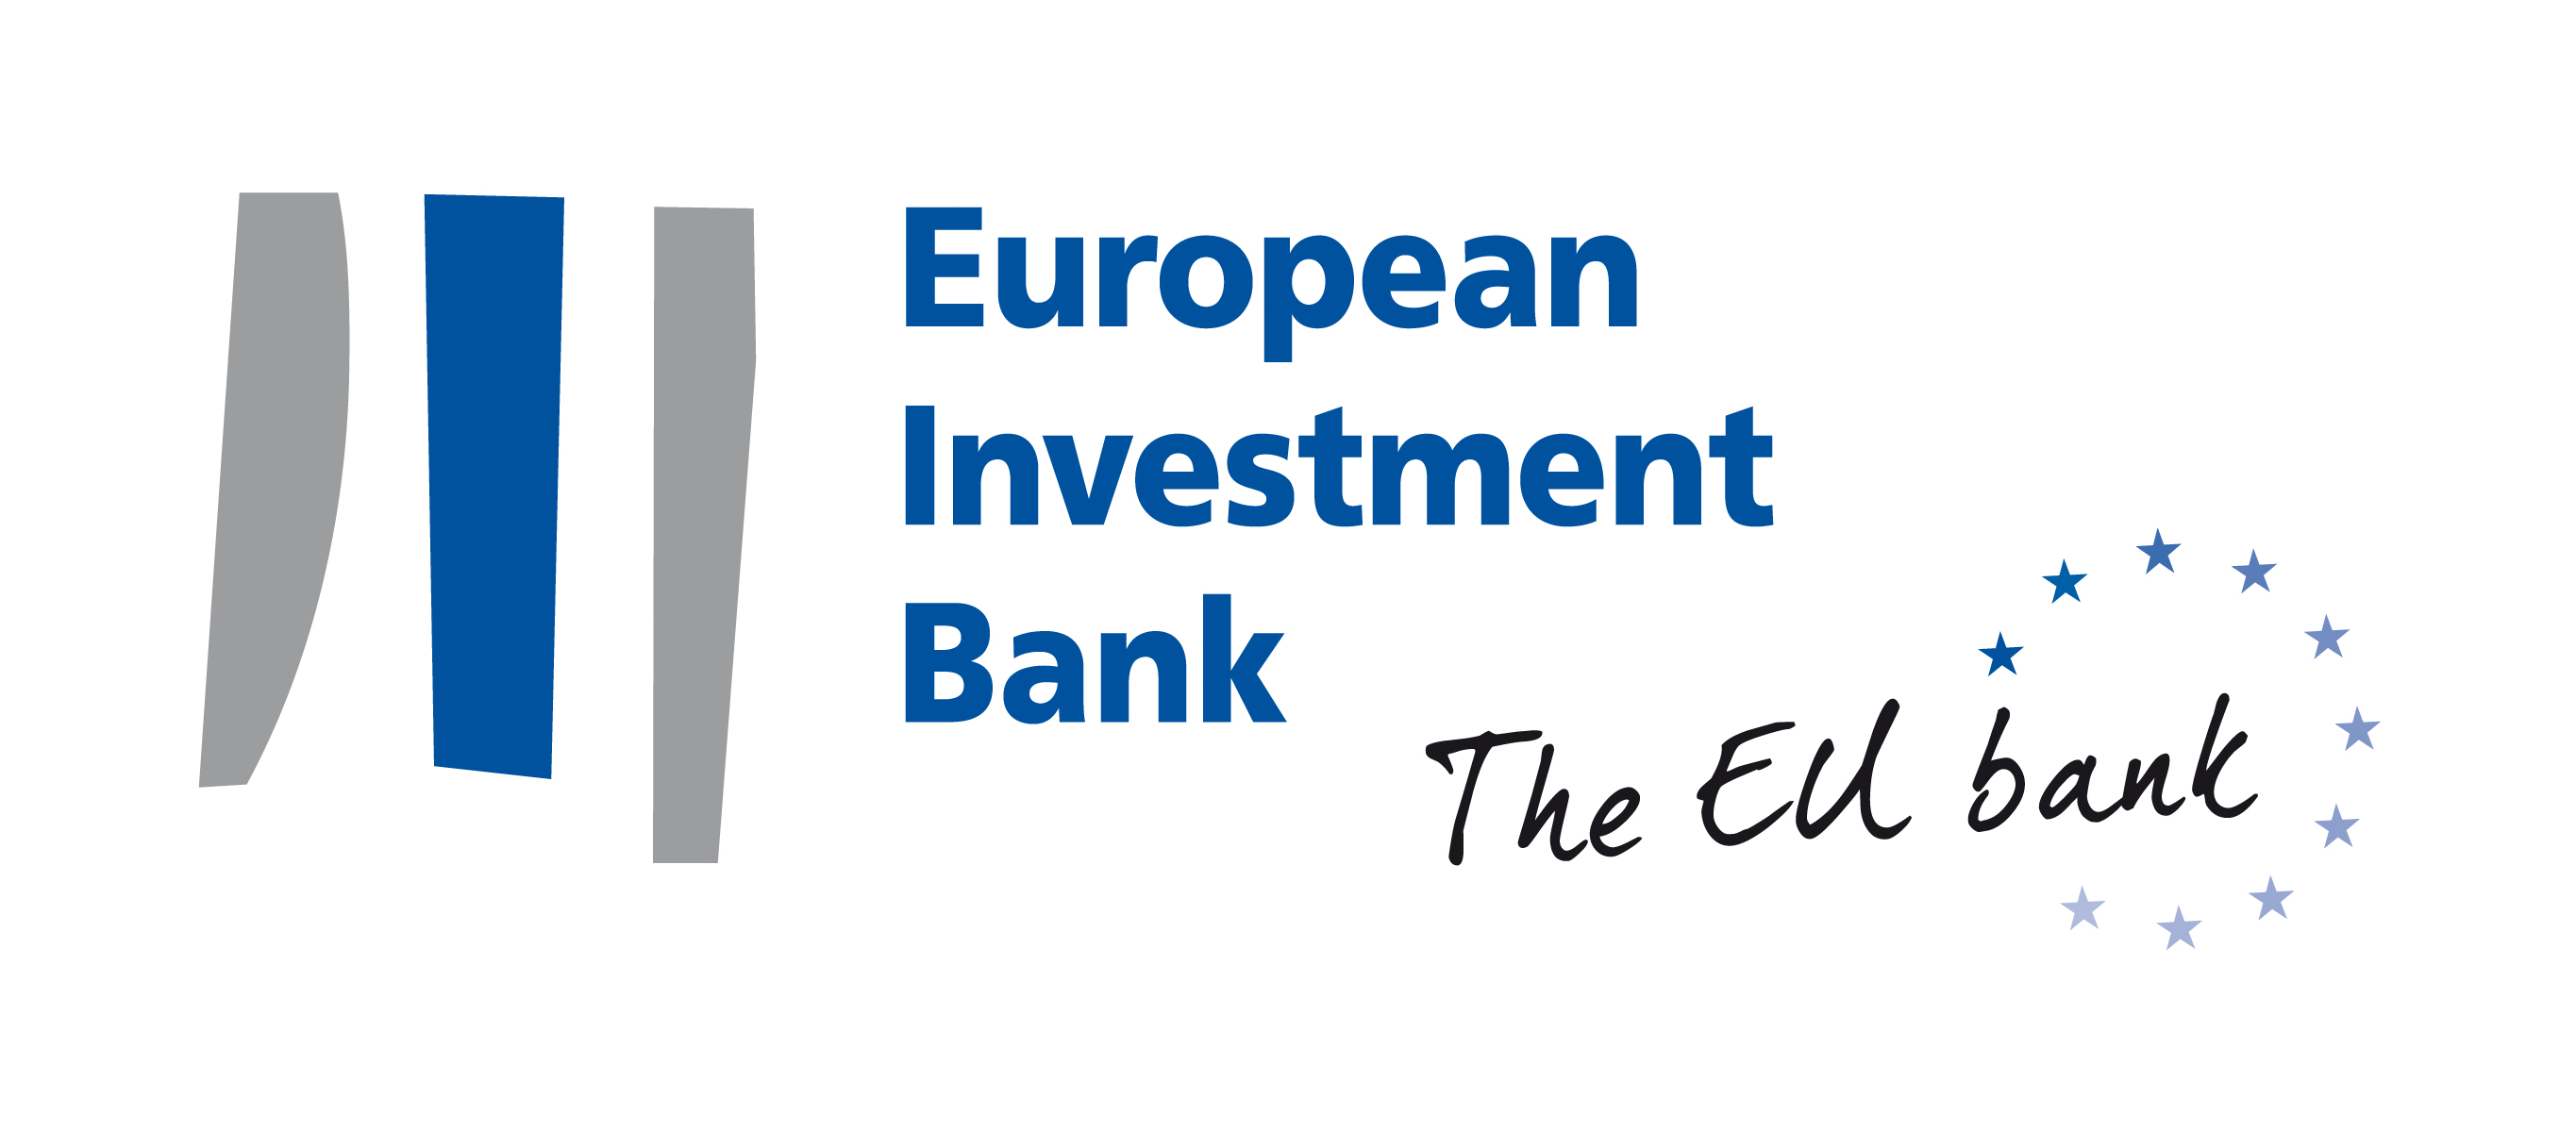 Conference of the Parties (COP27): European Investment Bank (EIB) presents framework to support environmental sustainability